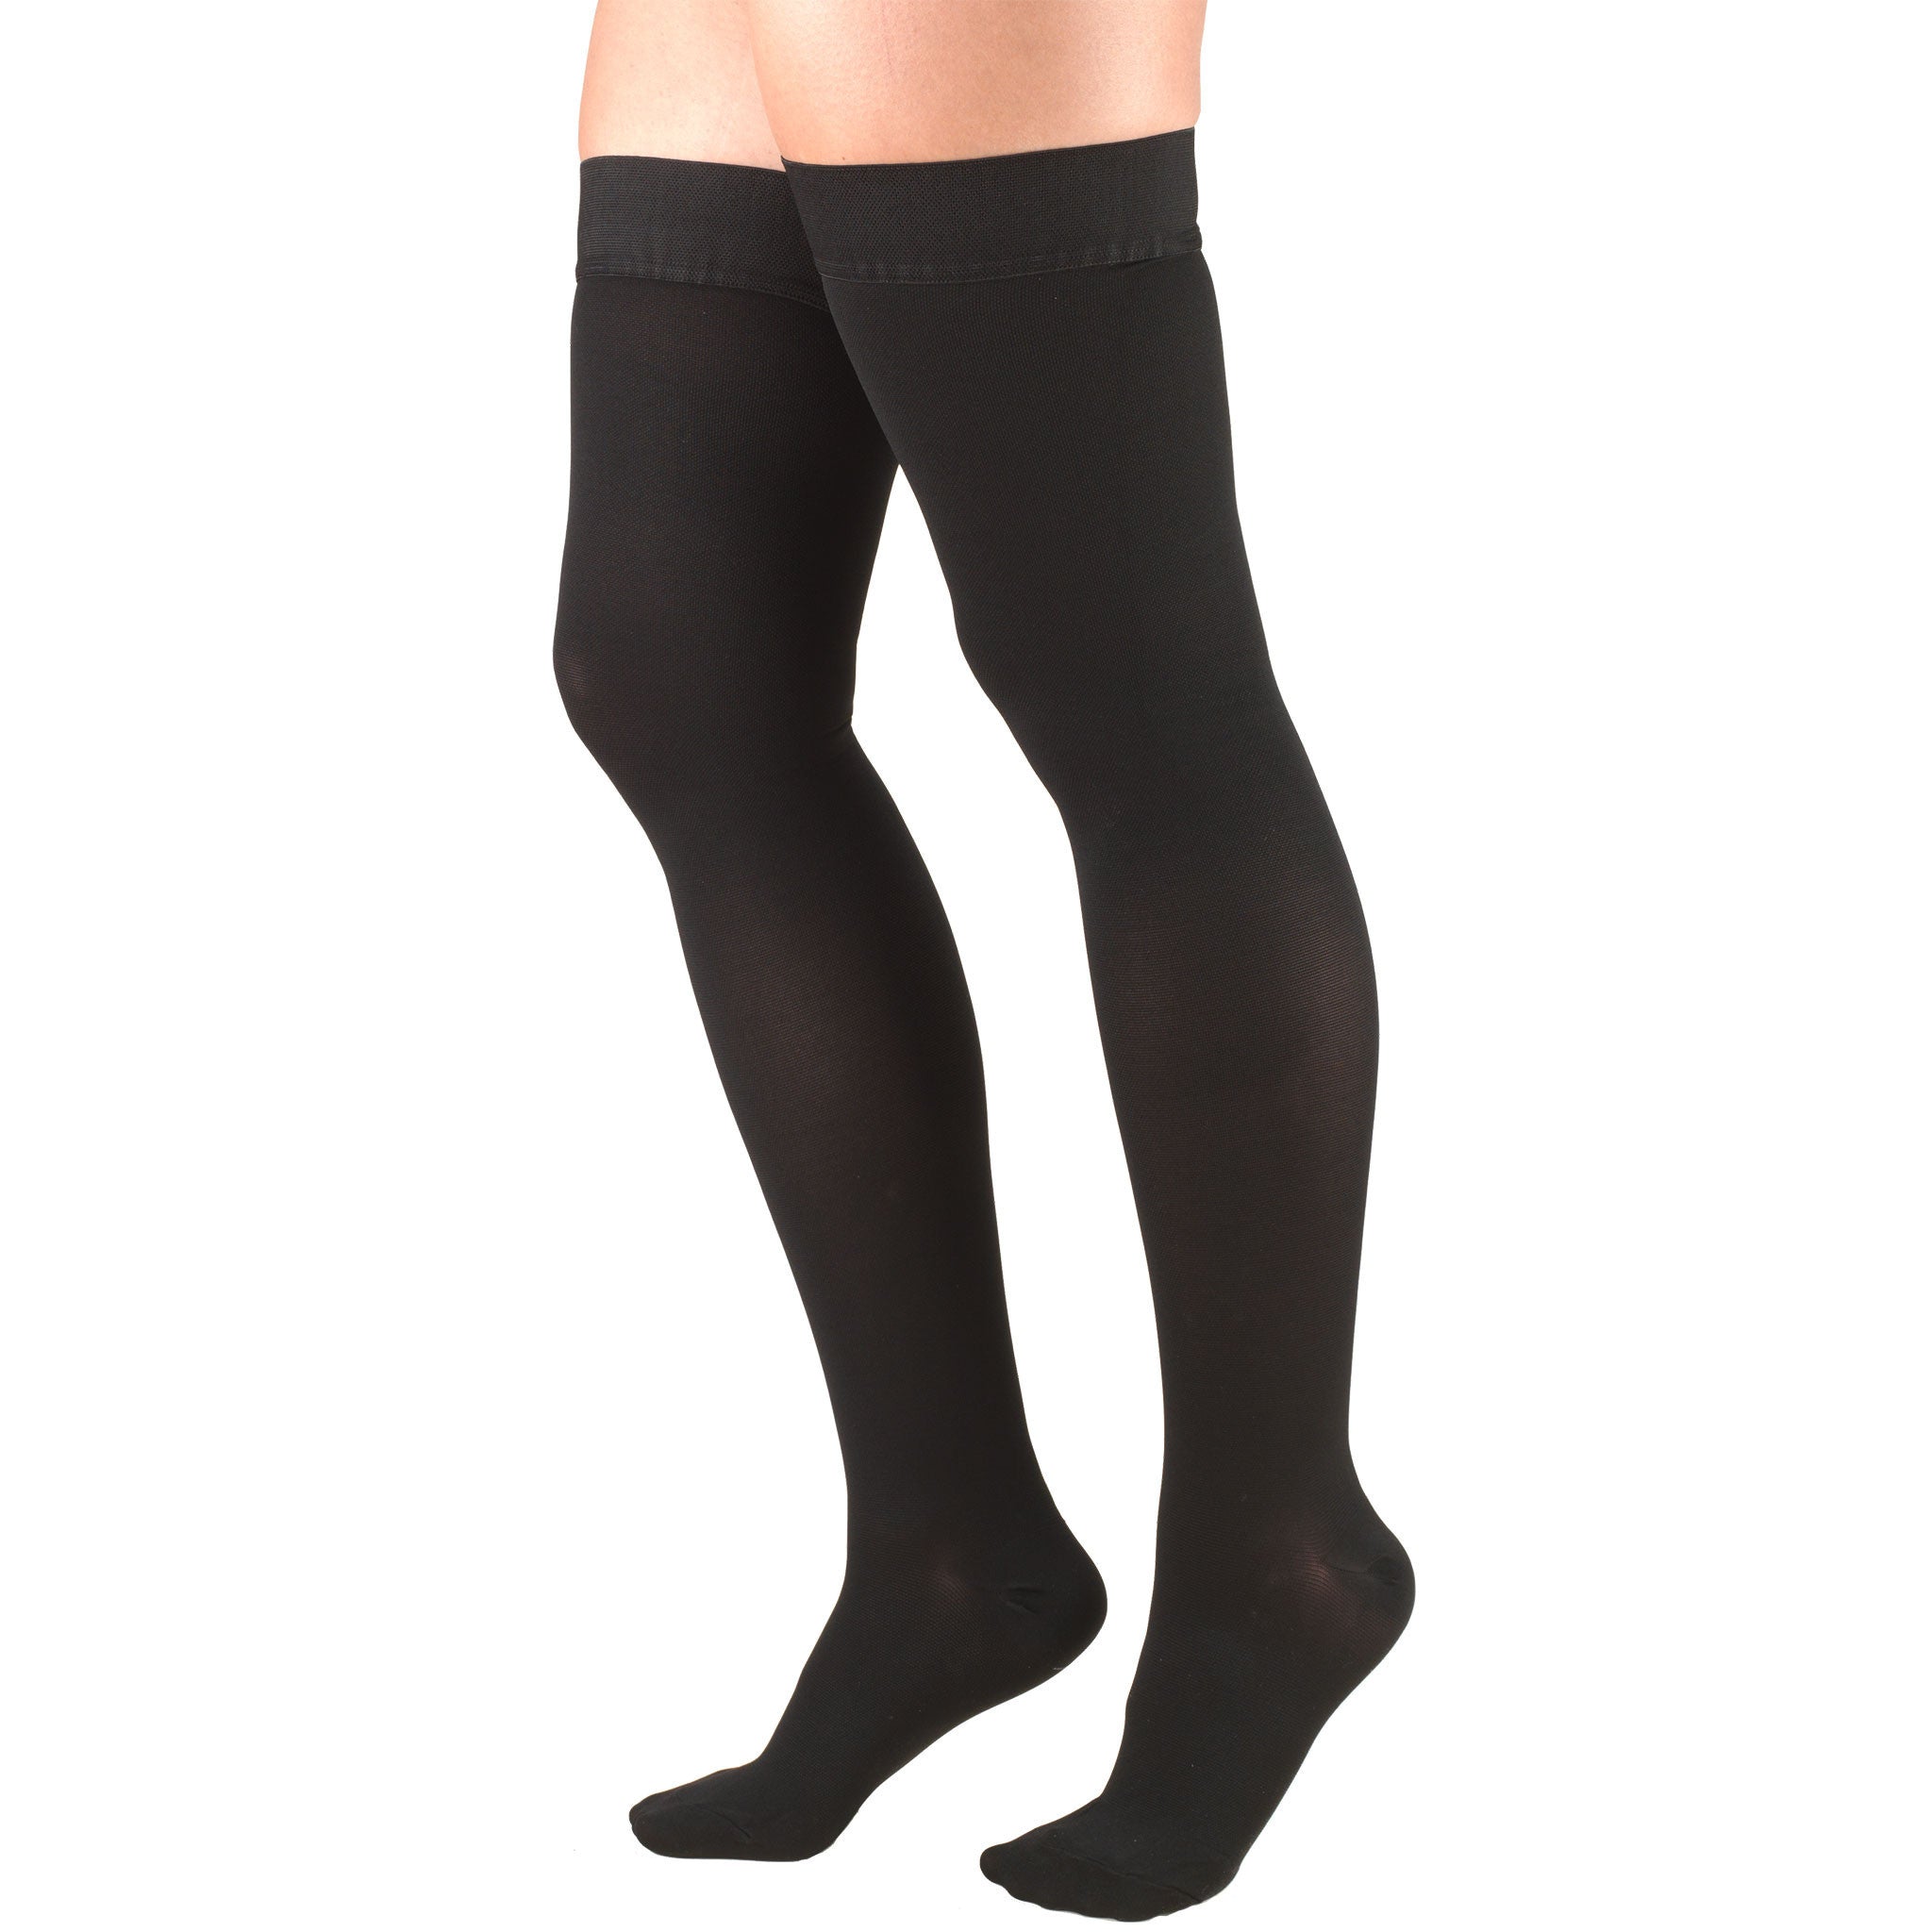 Thigh High Compression Stockings w/ Stay-Up Top, 30-40 mmHg, Black (Truform  8848)